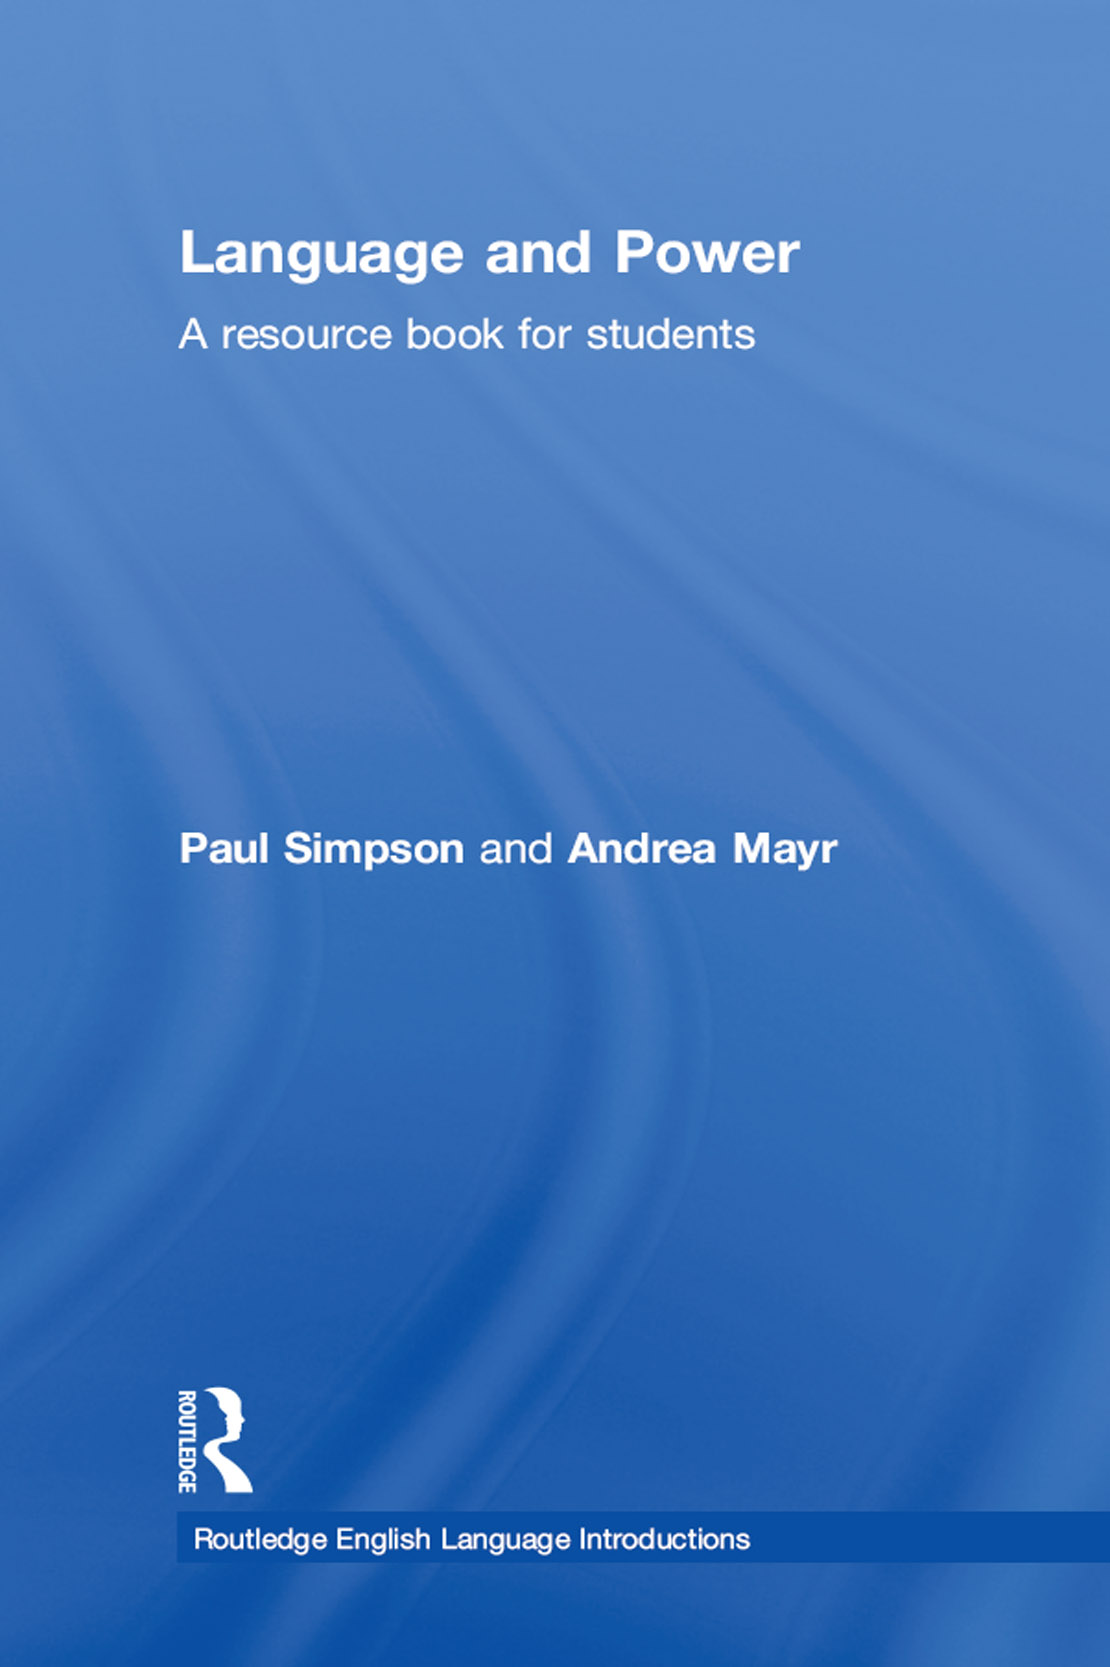 LANGUAGE AND POWER Routledge English Language Introductions cover core areas - photo 1